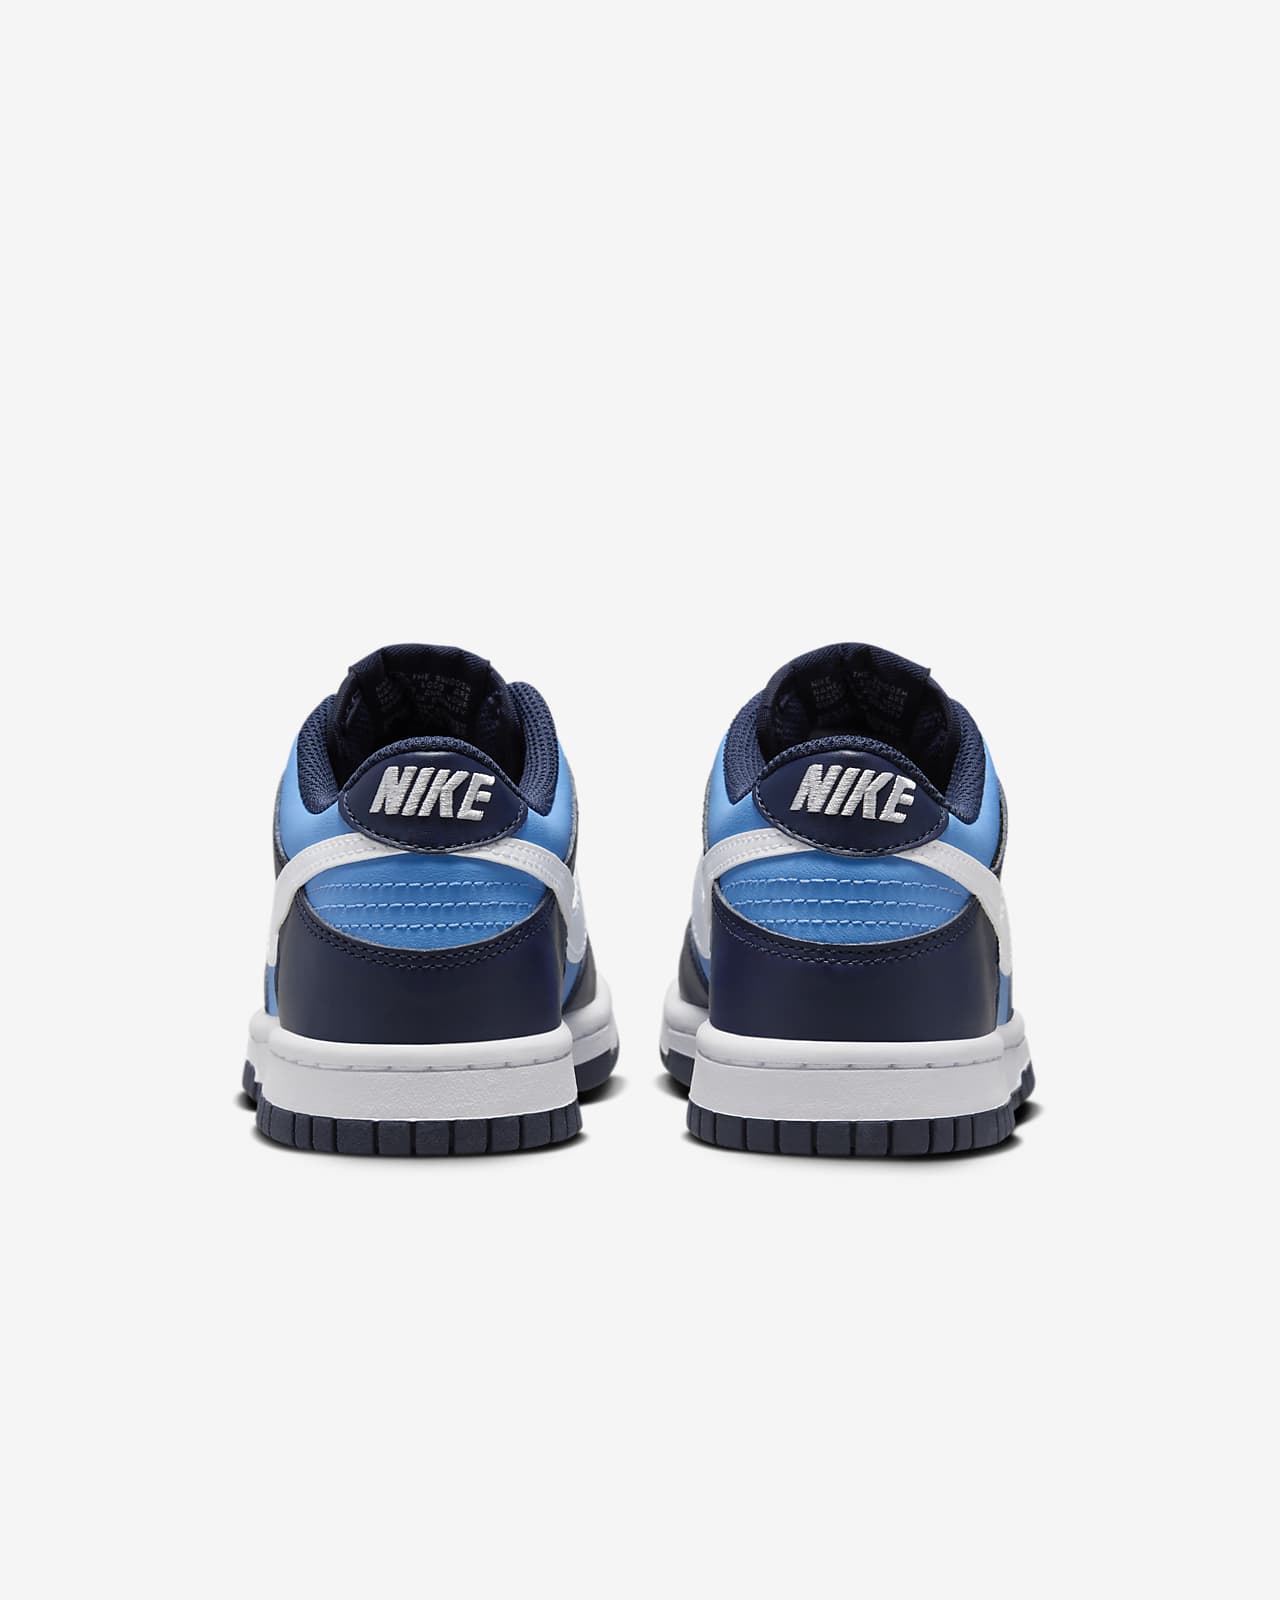 NIKE DUNK LOW UNC WHITE/BLUE - SNEAKERS CHILDREN